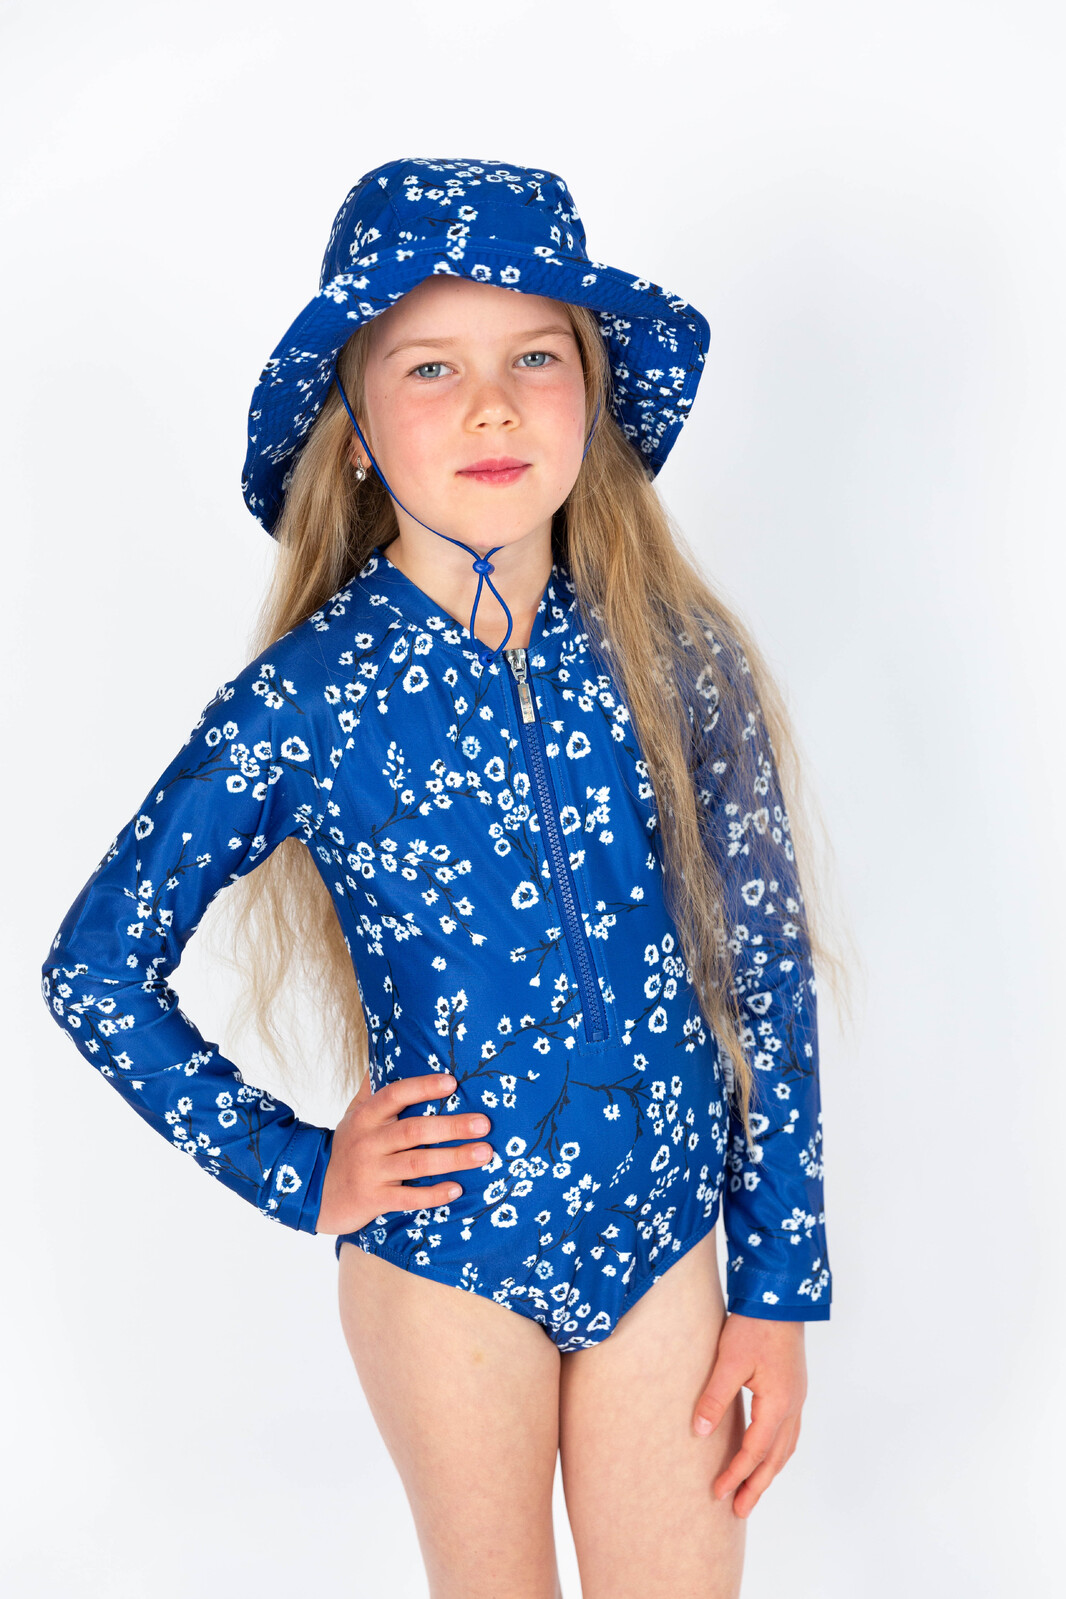 Blooms Long Sleeve Bathers | Girls Swimsuit | Free Shipping Over $75